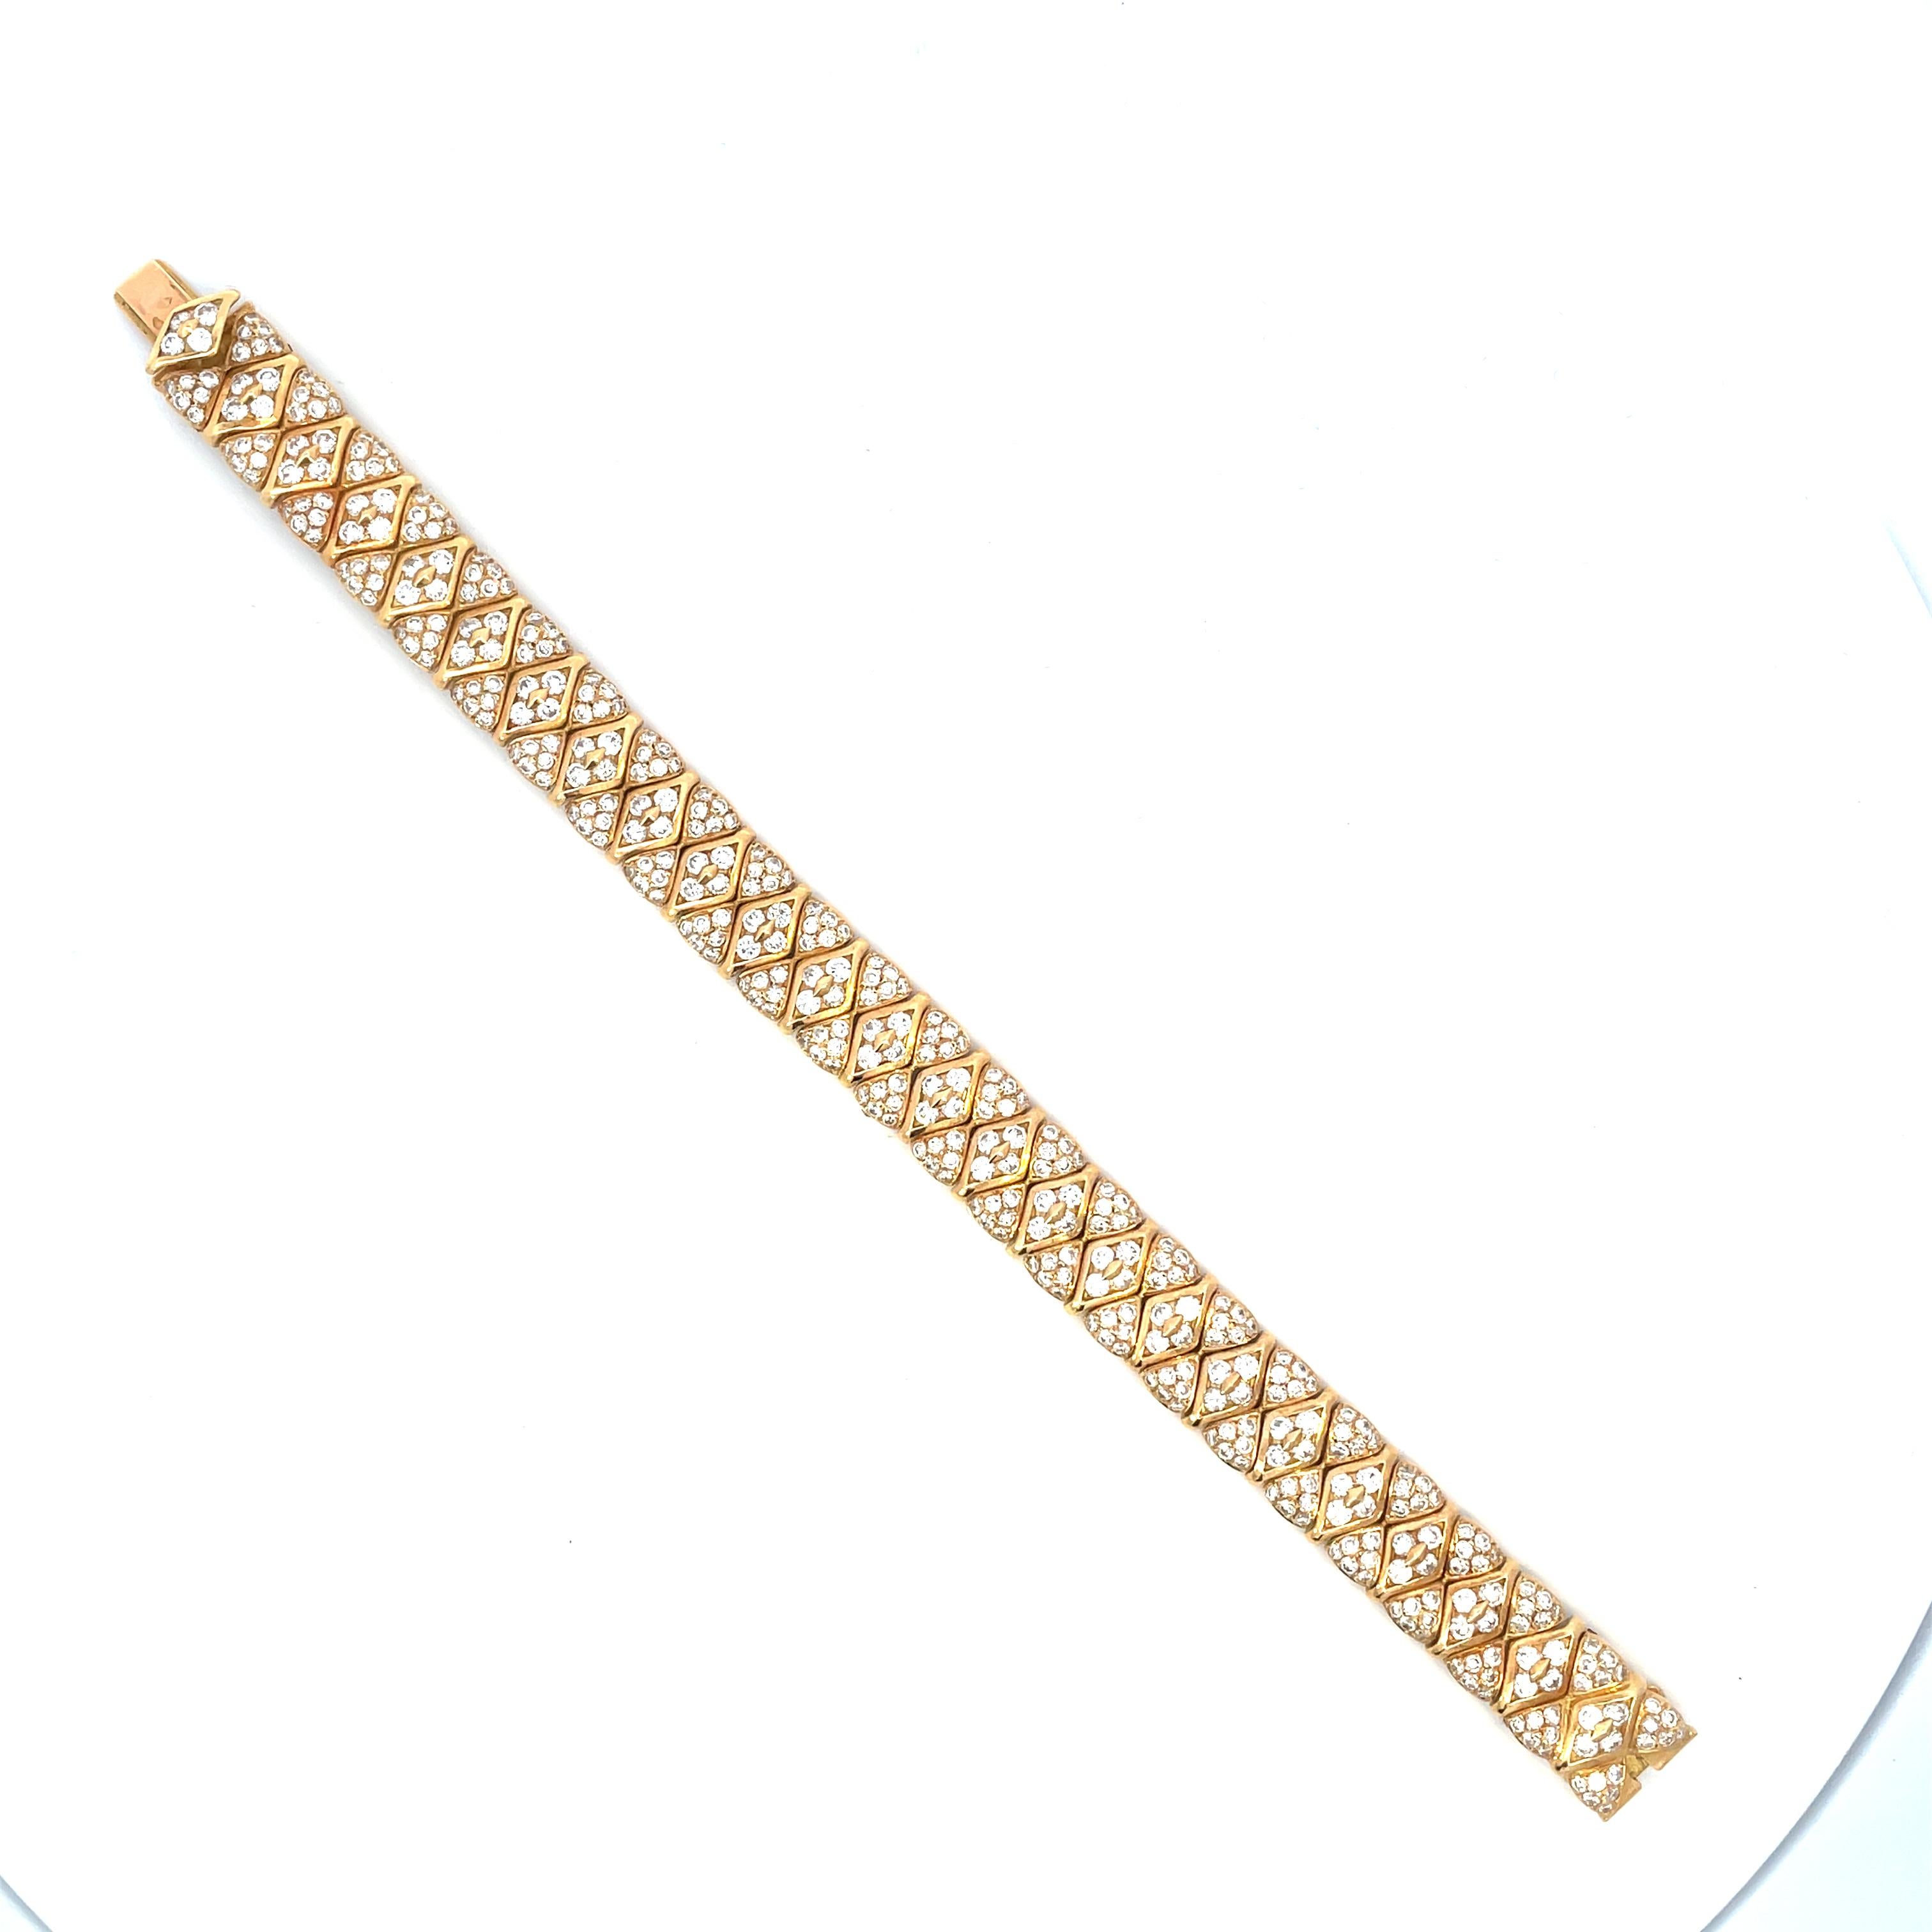 A lovely signed Mauboussin diamond link bracelet set in 18k yellow gold.
The bracelet is composed of 50 beautifully crafted articulated links, all of which being centrally set with a pavé set diamond panel.

Due to the links being articulated, this